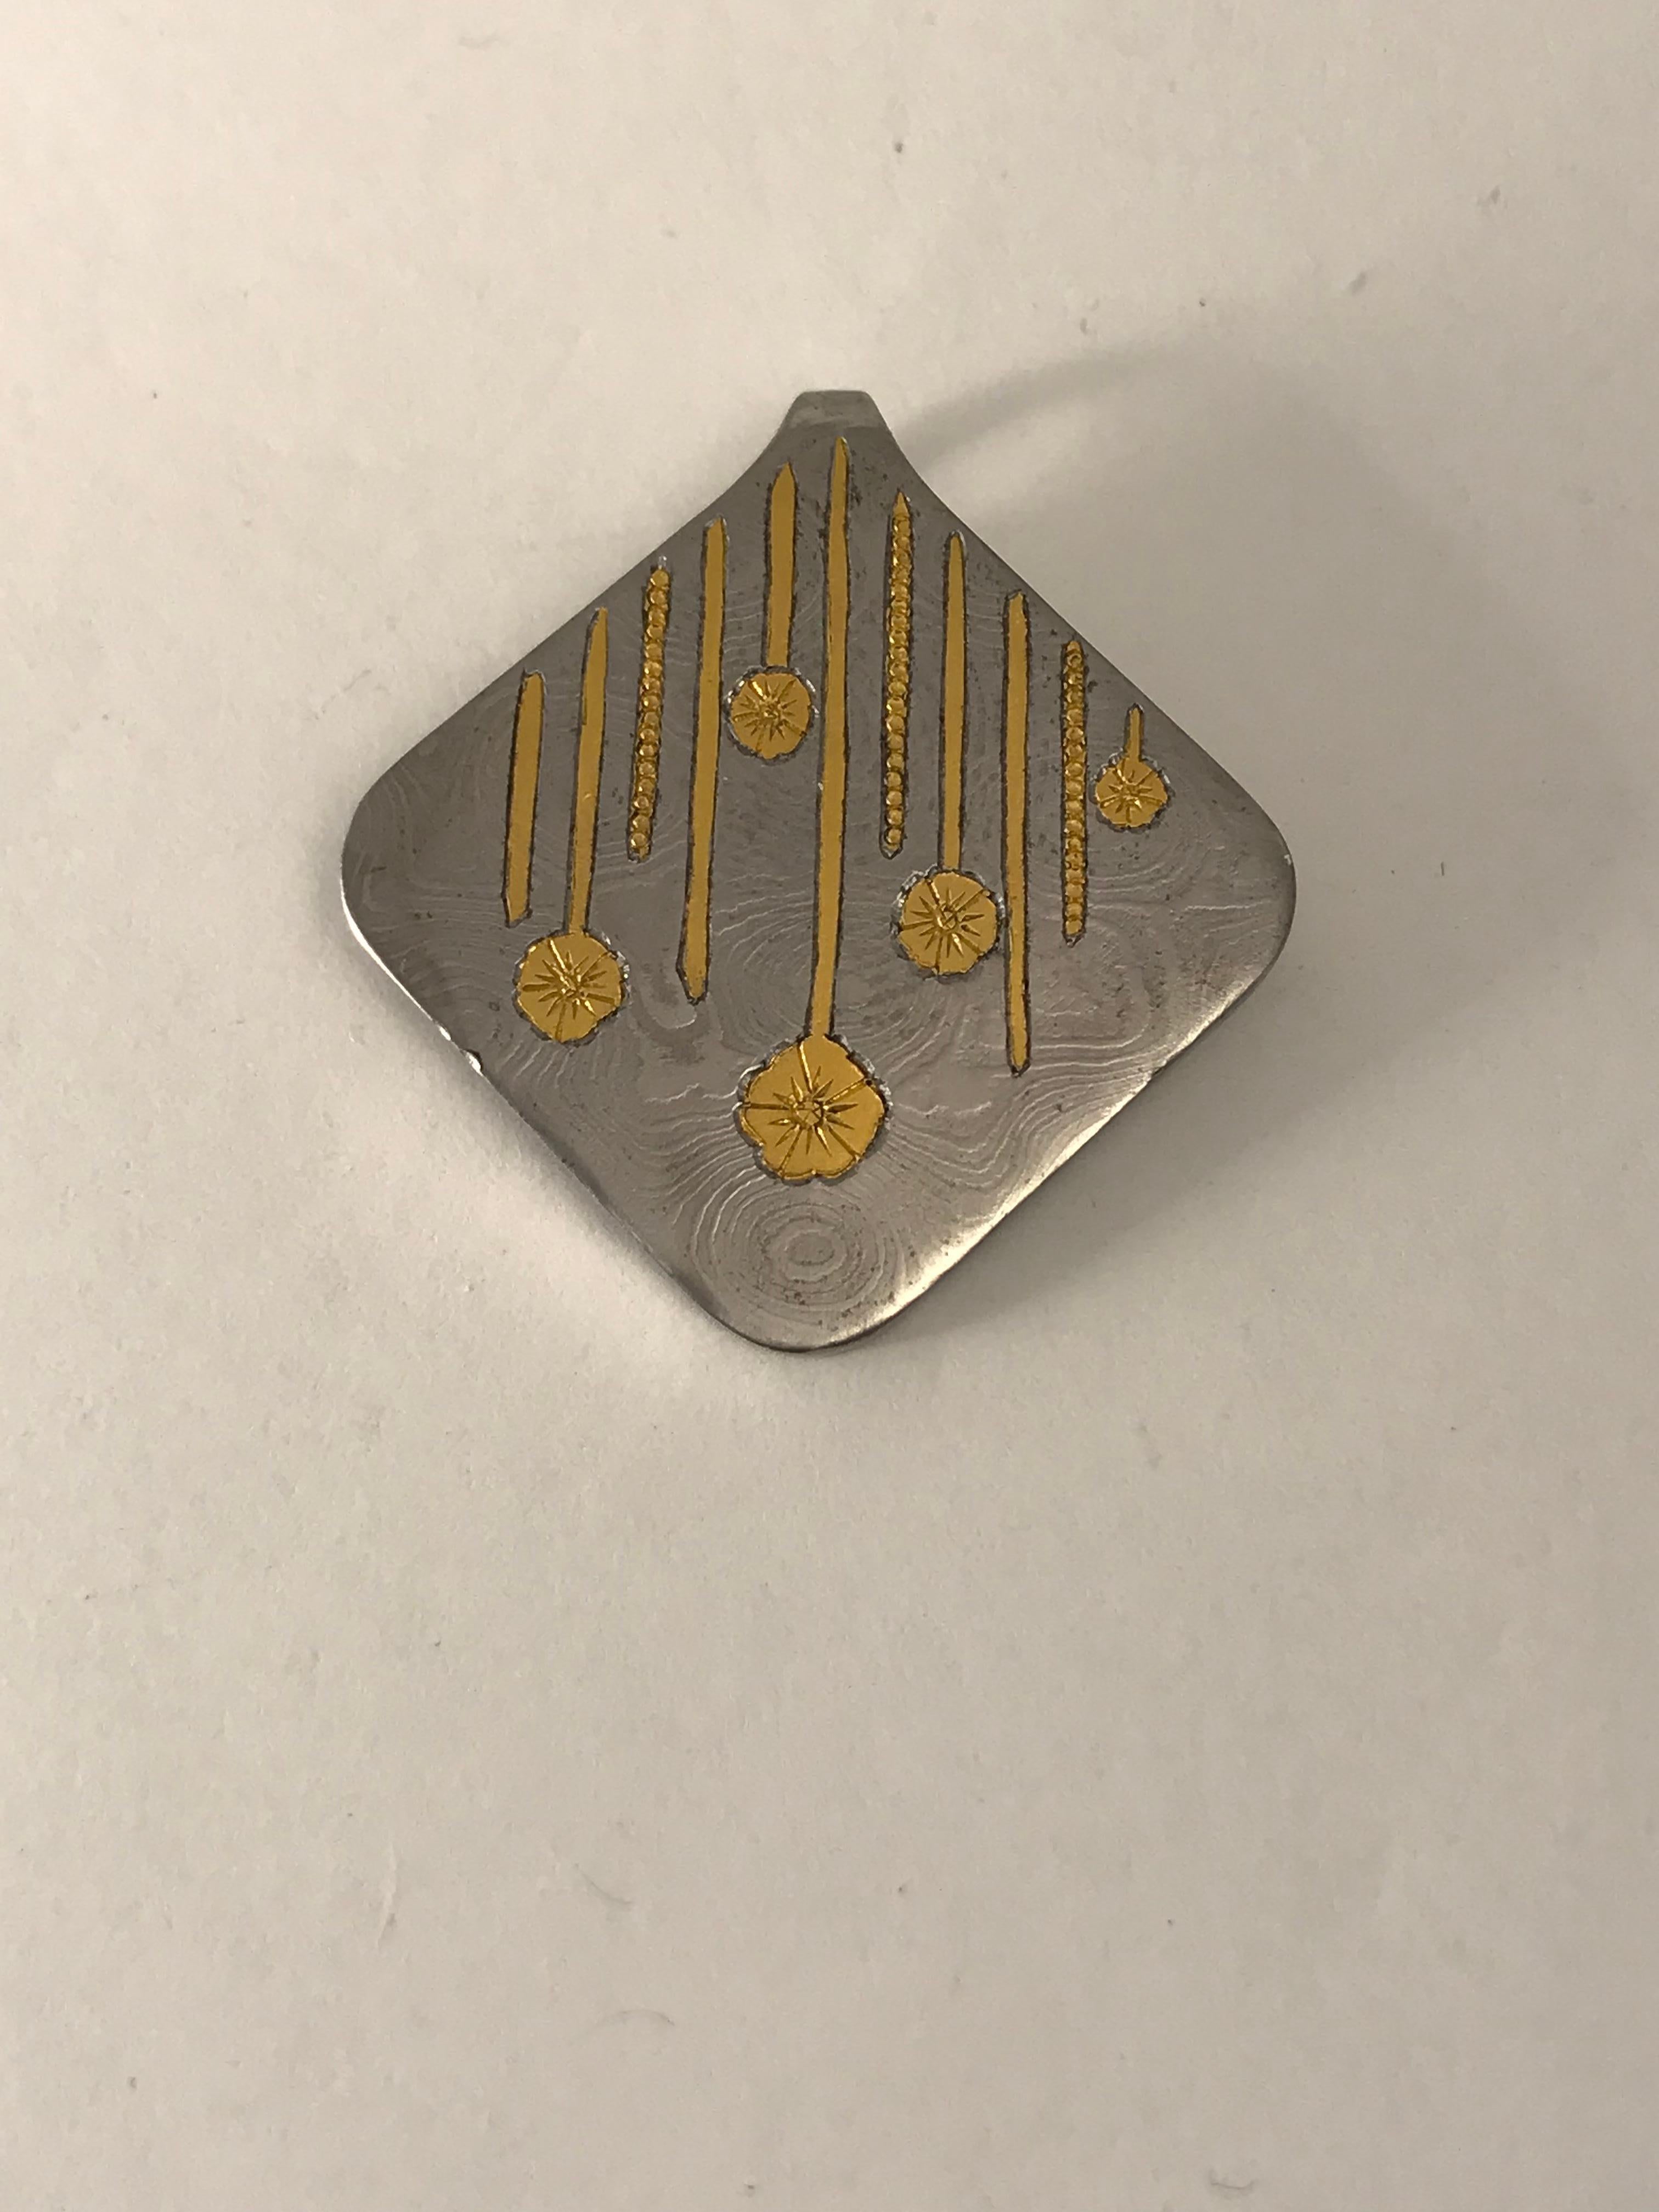 This is a beautiful pendant made of Damascus Steel with 24 karat gold inlays. This is difficult to do because I have to cut out the pattern into the steel then hammer a sheet of 24k gold into the shape then engrave the details. 

The gold will NOT